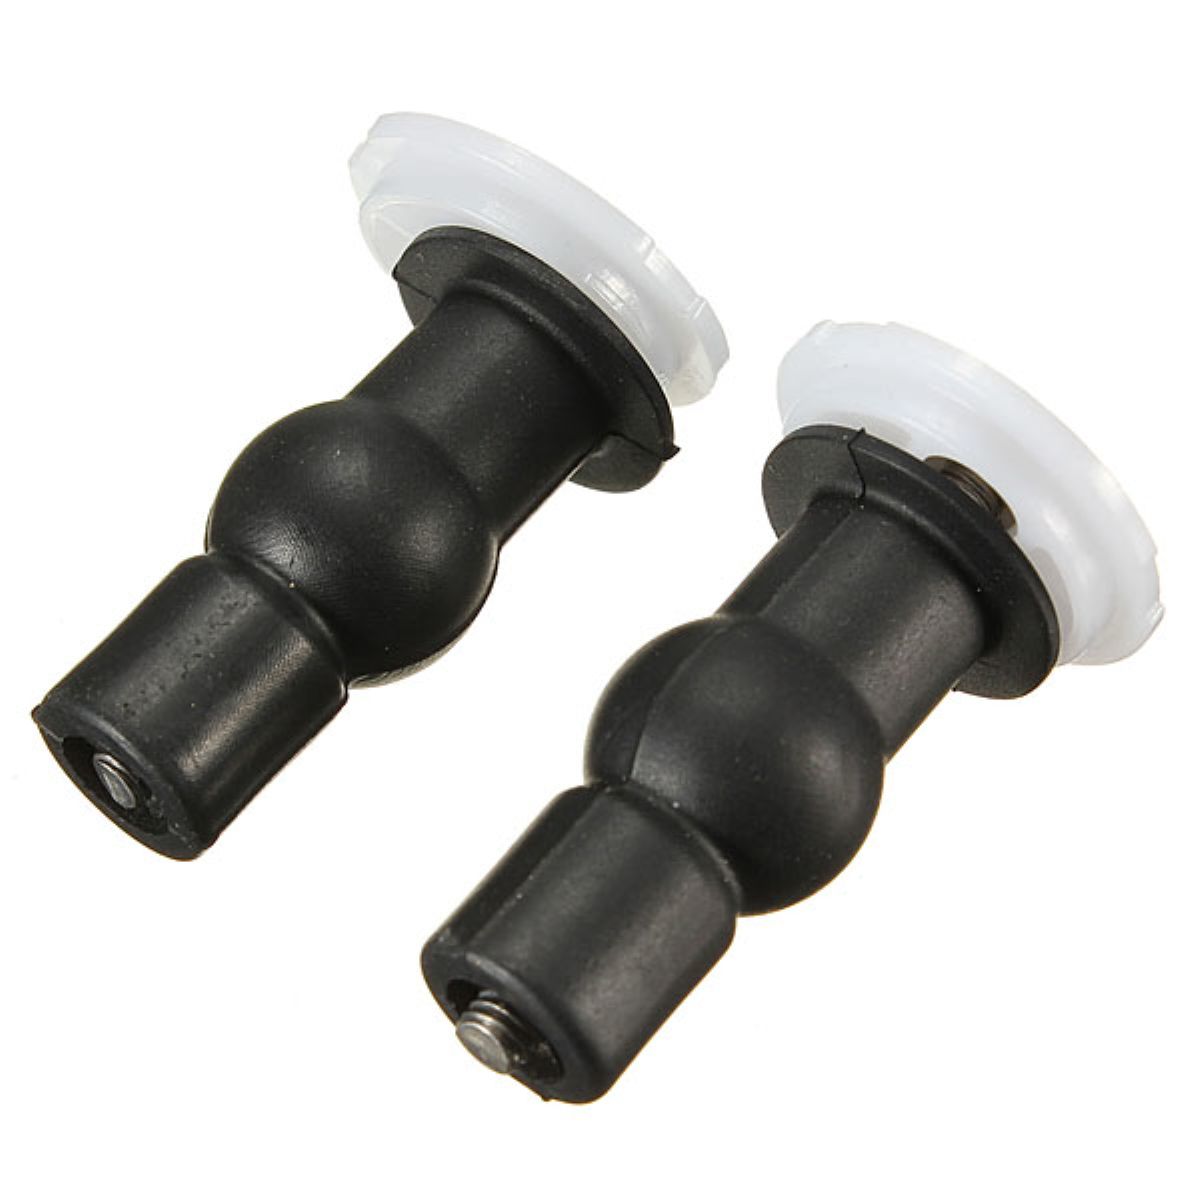 1-Pair-WC-Toilet-Seat-Hinges-Commode-Cover-Screw-Well-Nuts-Blind-Hole-Fixings-1653270